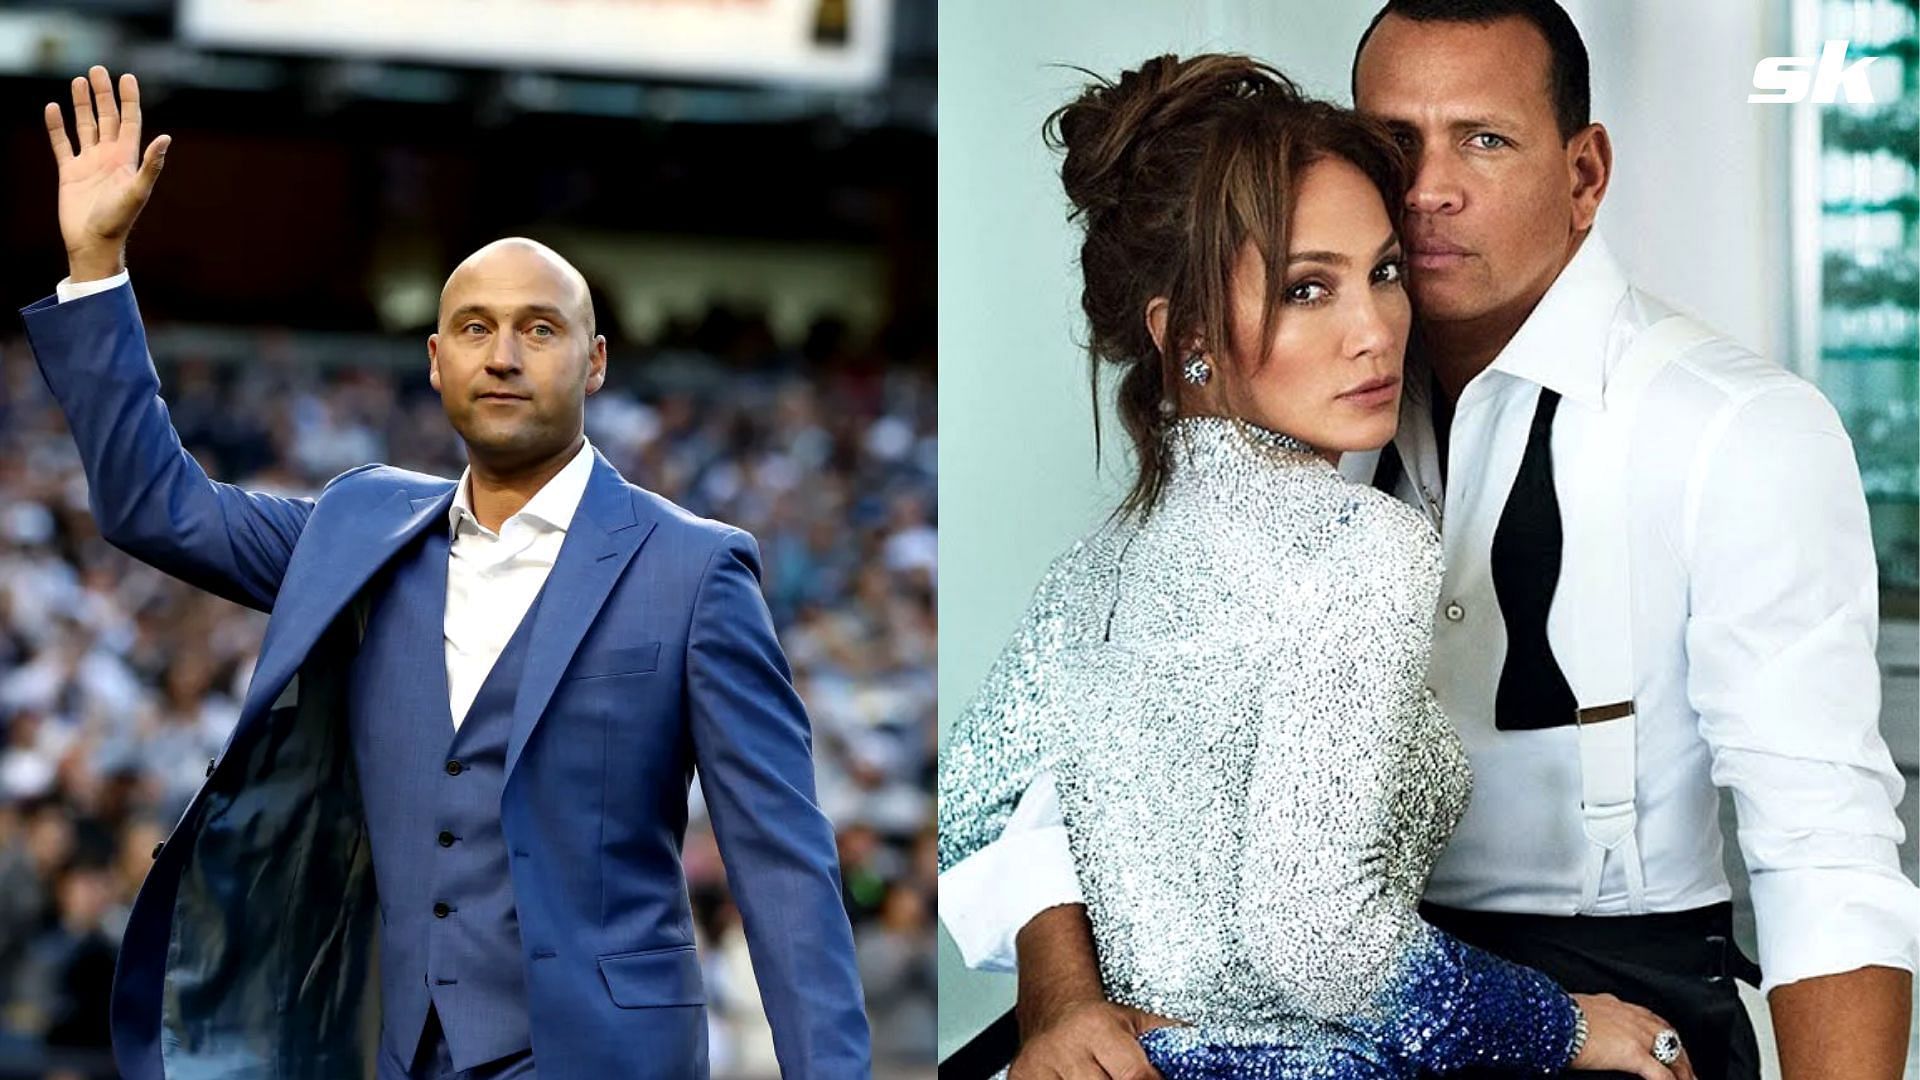 When Yankees great Alex Rodriguez skipped his former teammate Derek Jeter's  jersey retirement ceremony to go on a dinner date with Jennifer Lopez